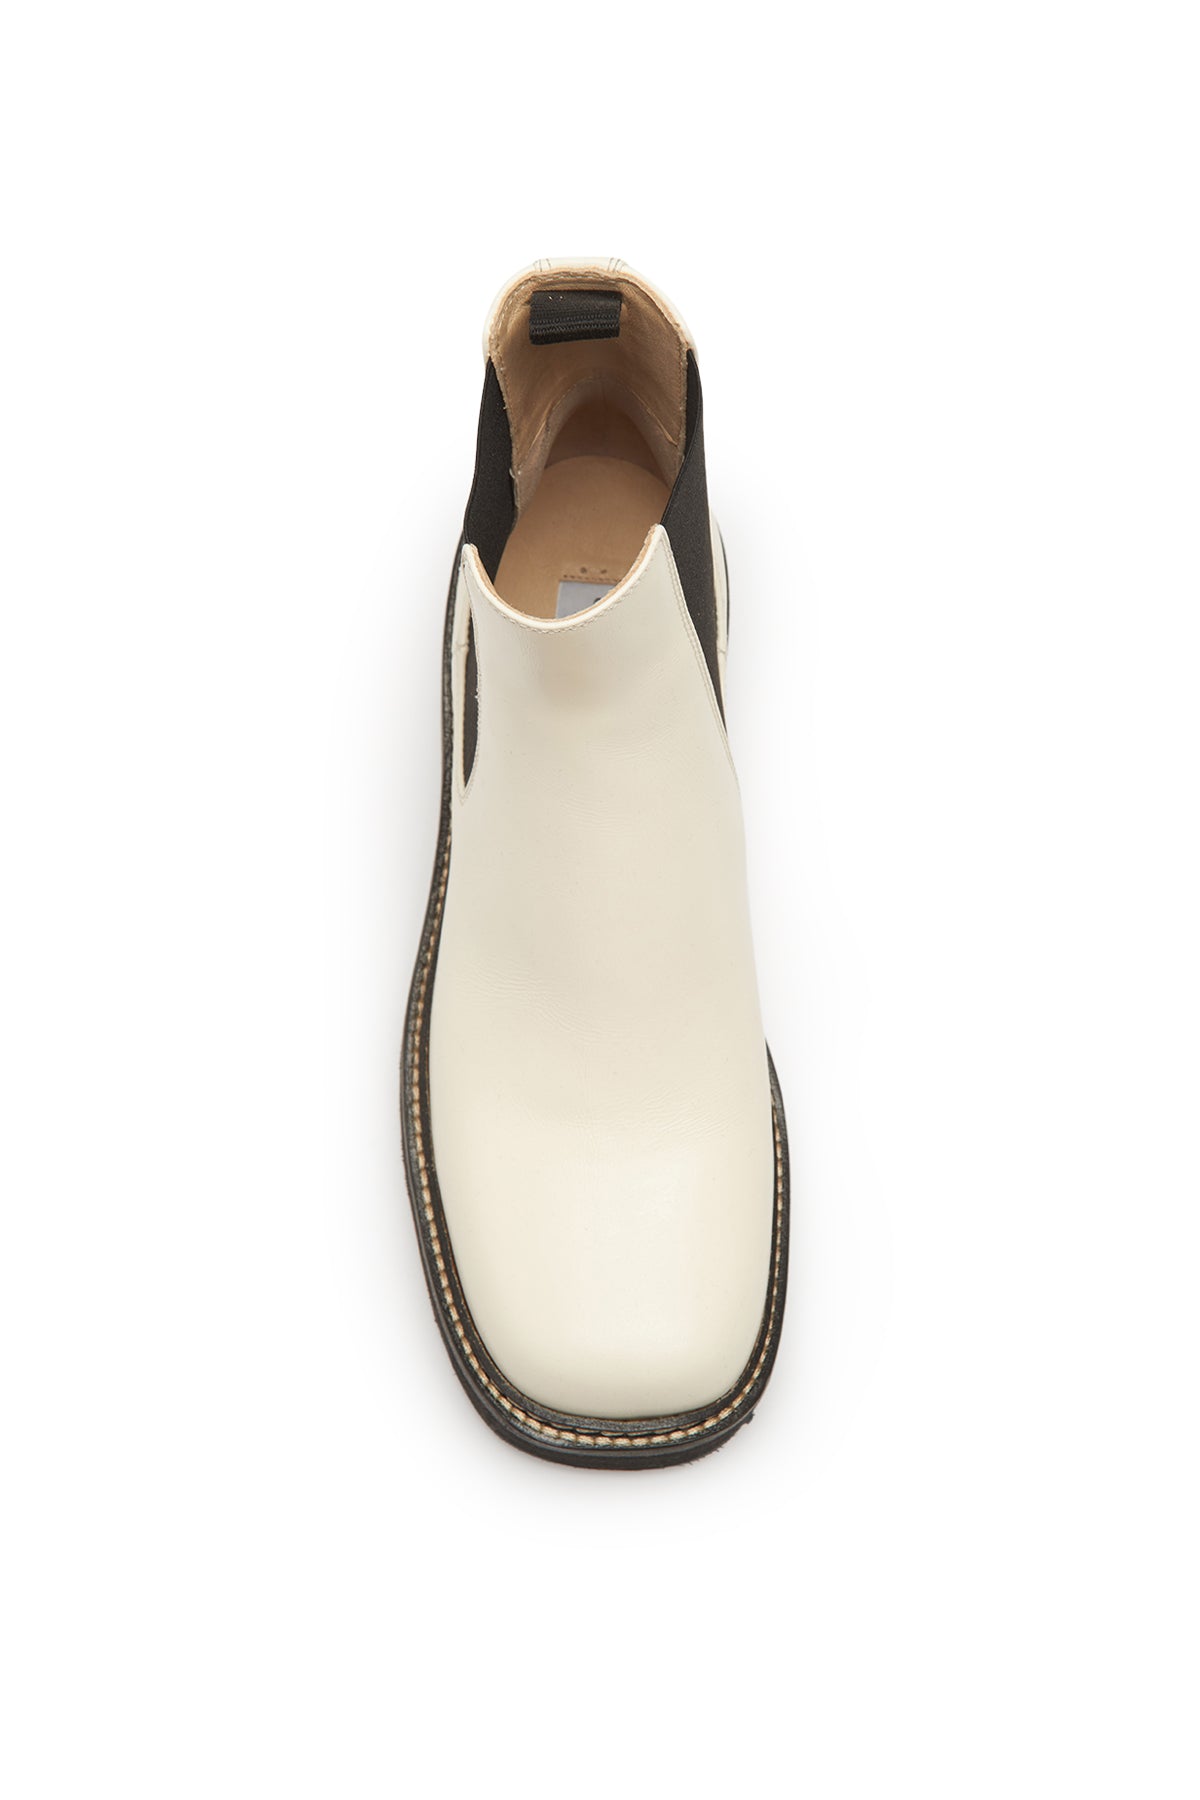 Jil Chelsea Boot in Cream Leather